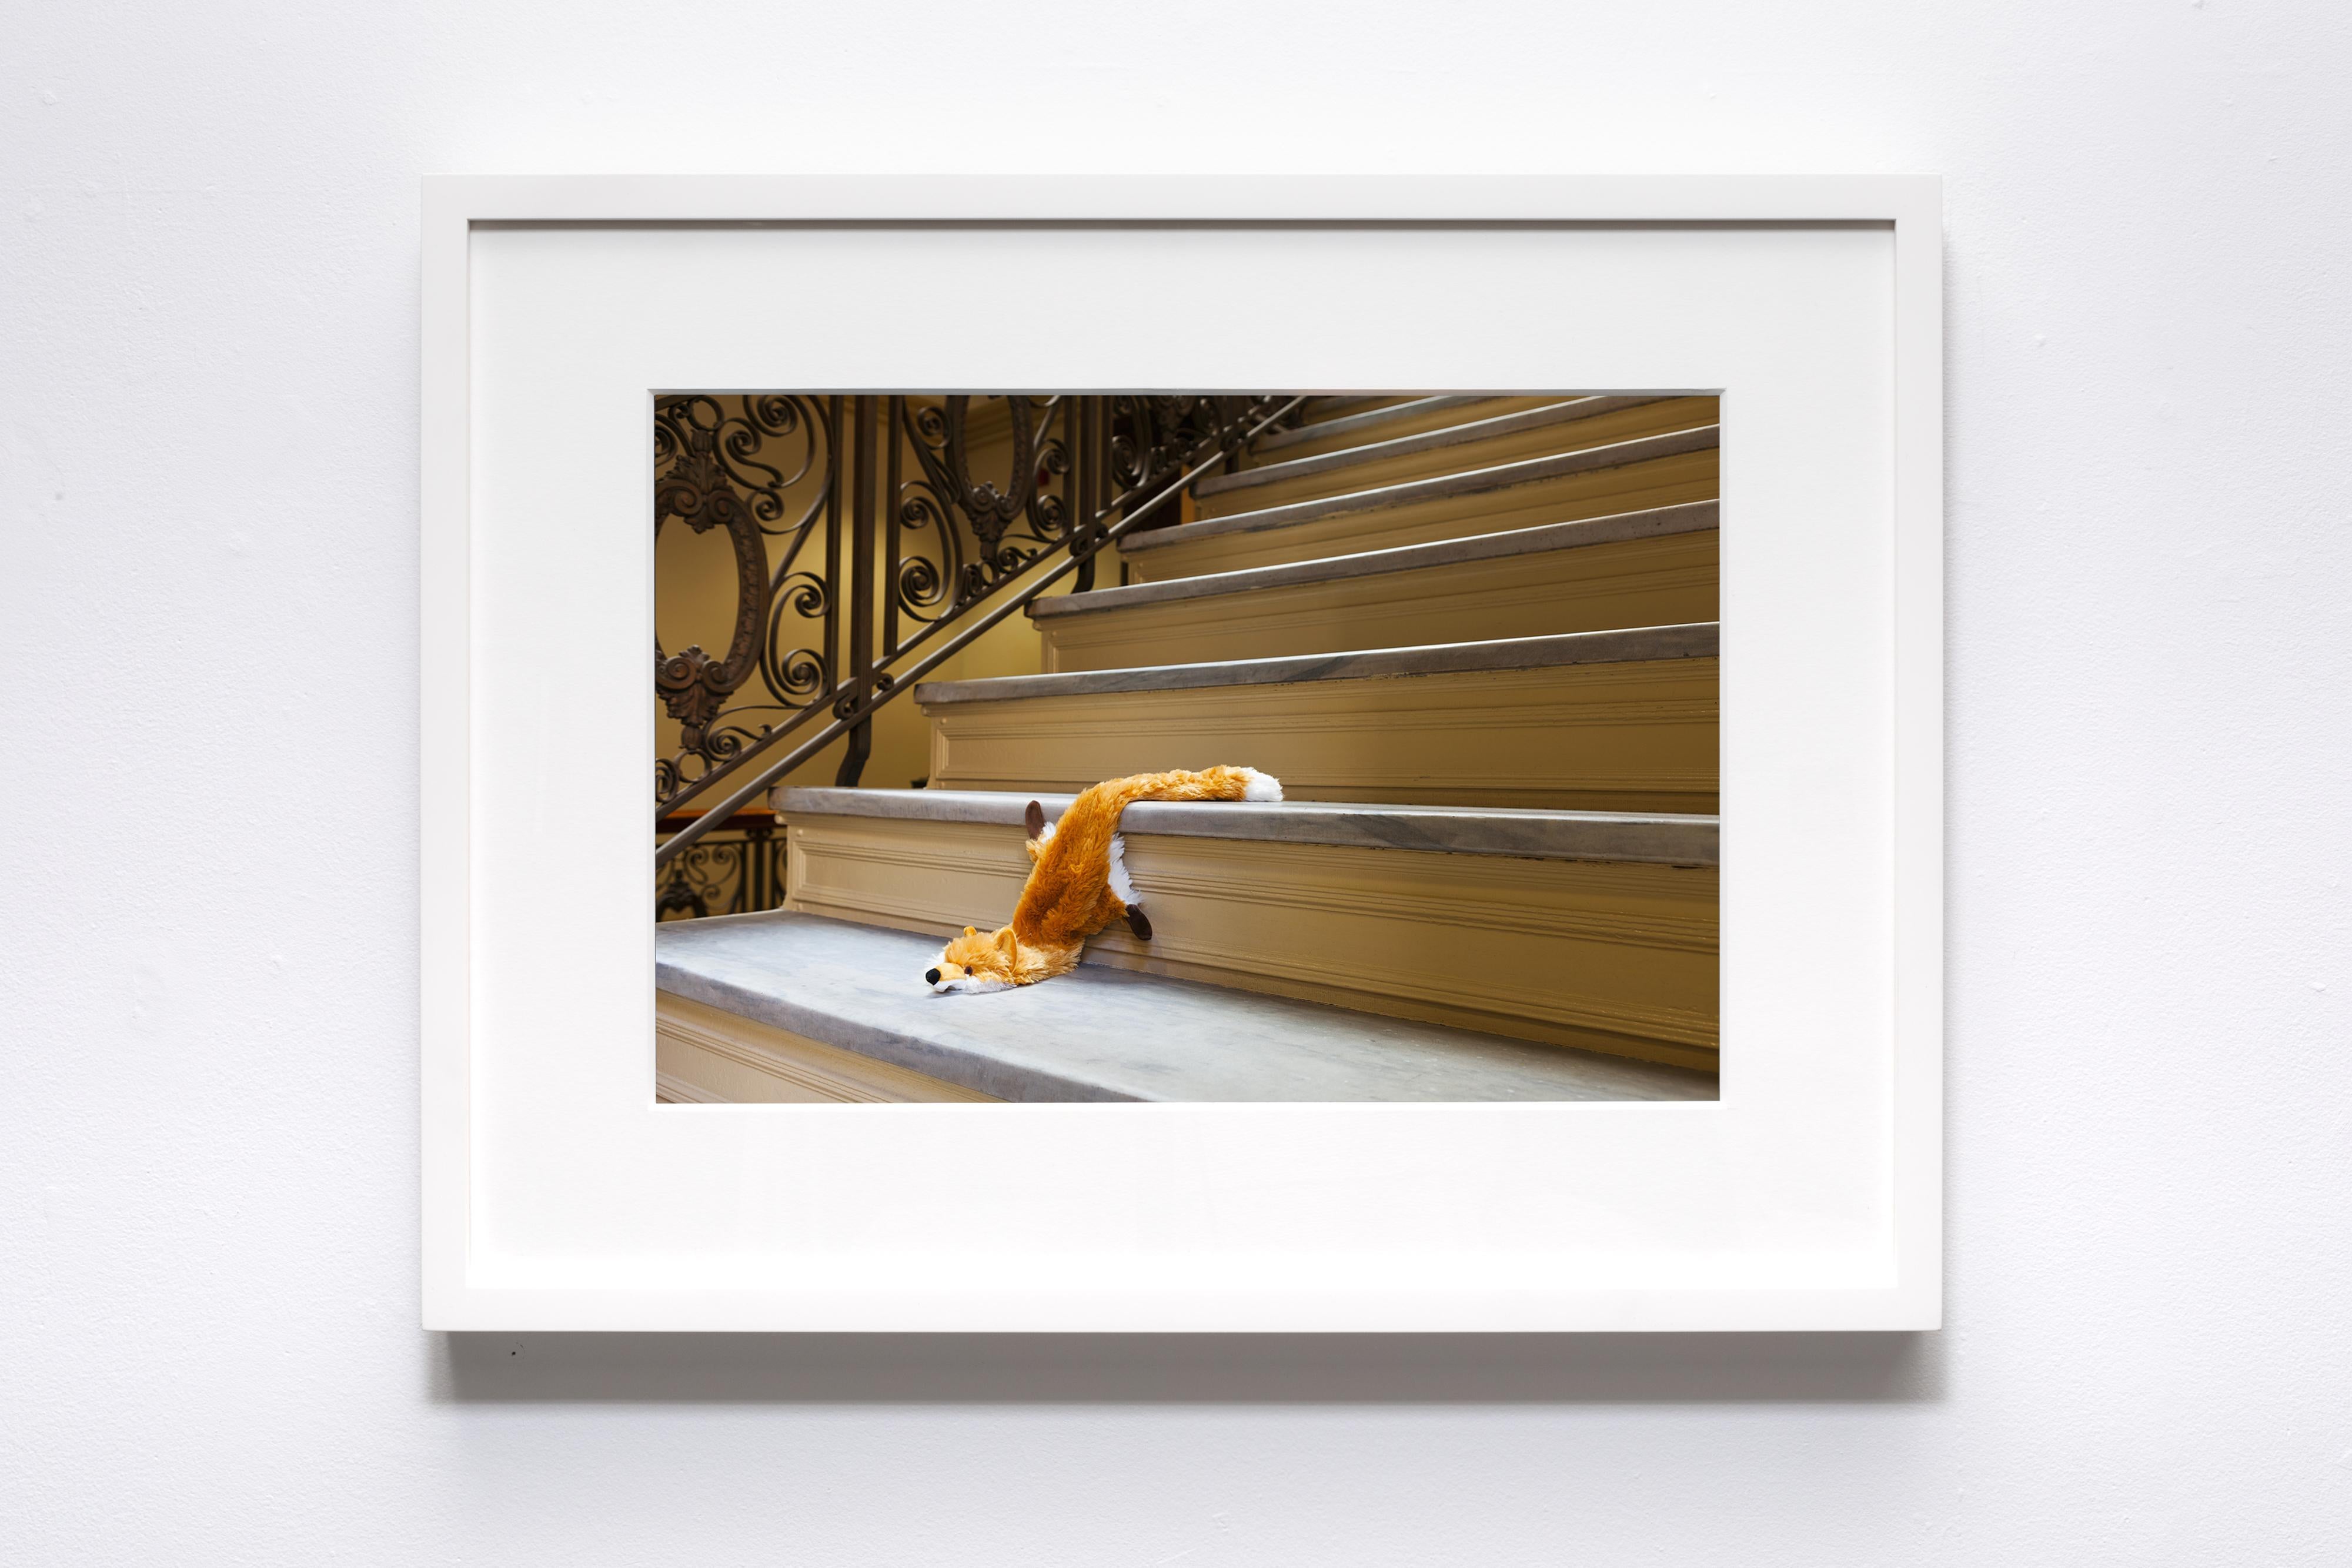 “Morbidity & Mortality: Fox” Humorous Photograph of a Dog Toy in a Crime Scene - Contemporary Print by Jeanette May